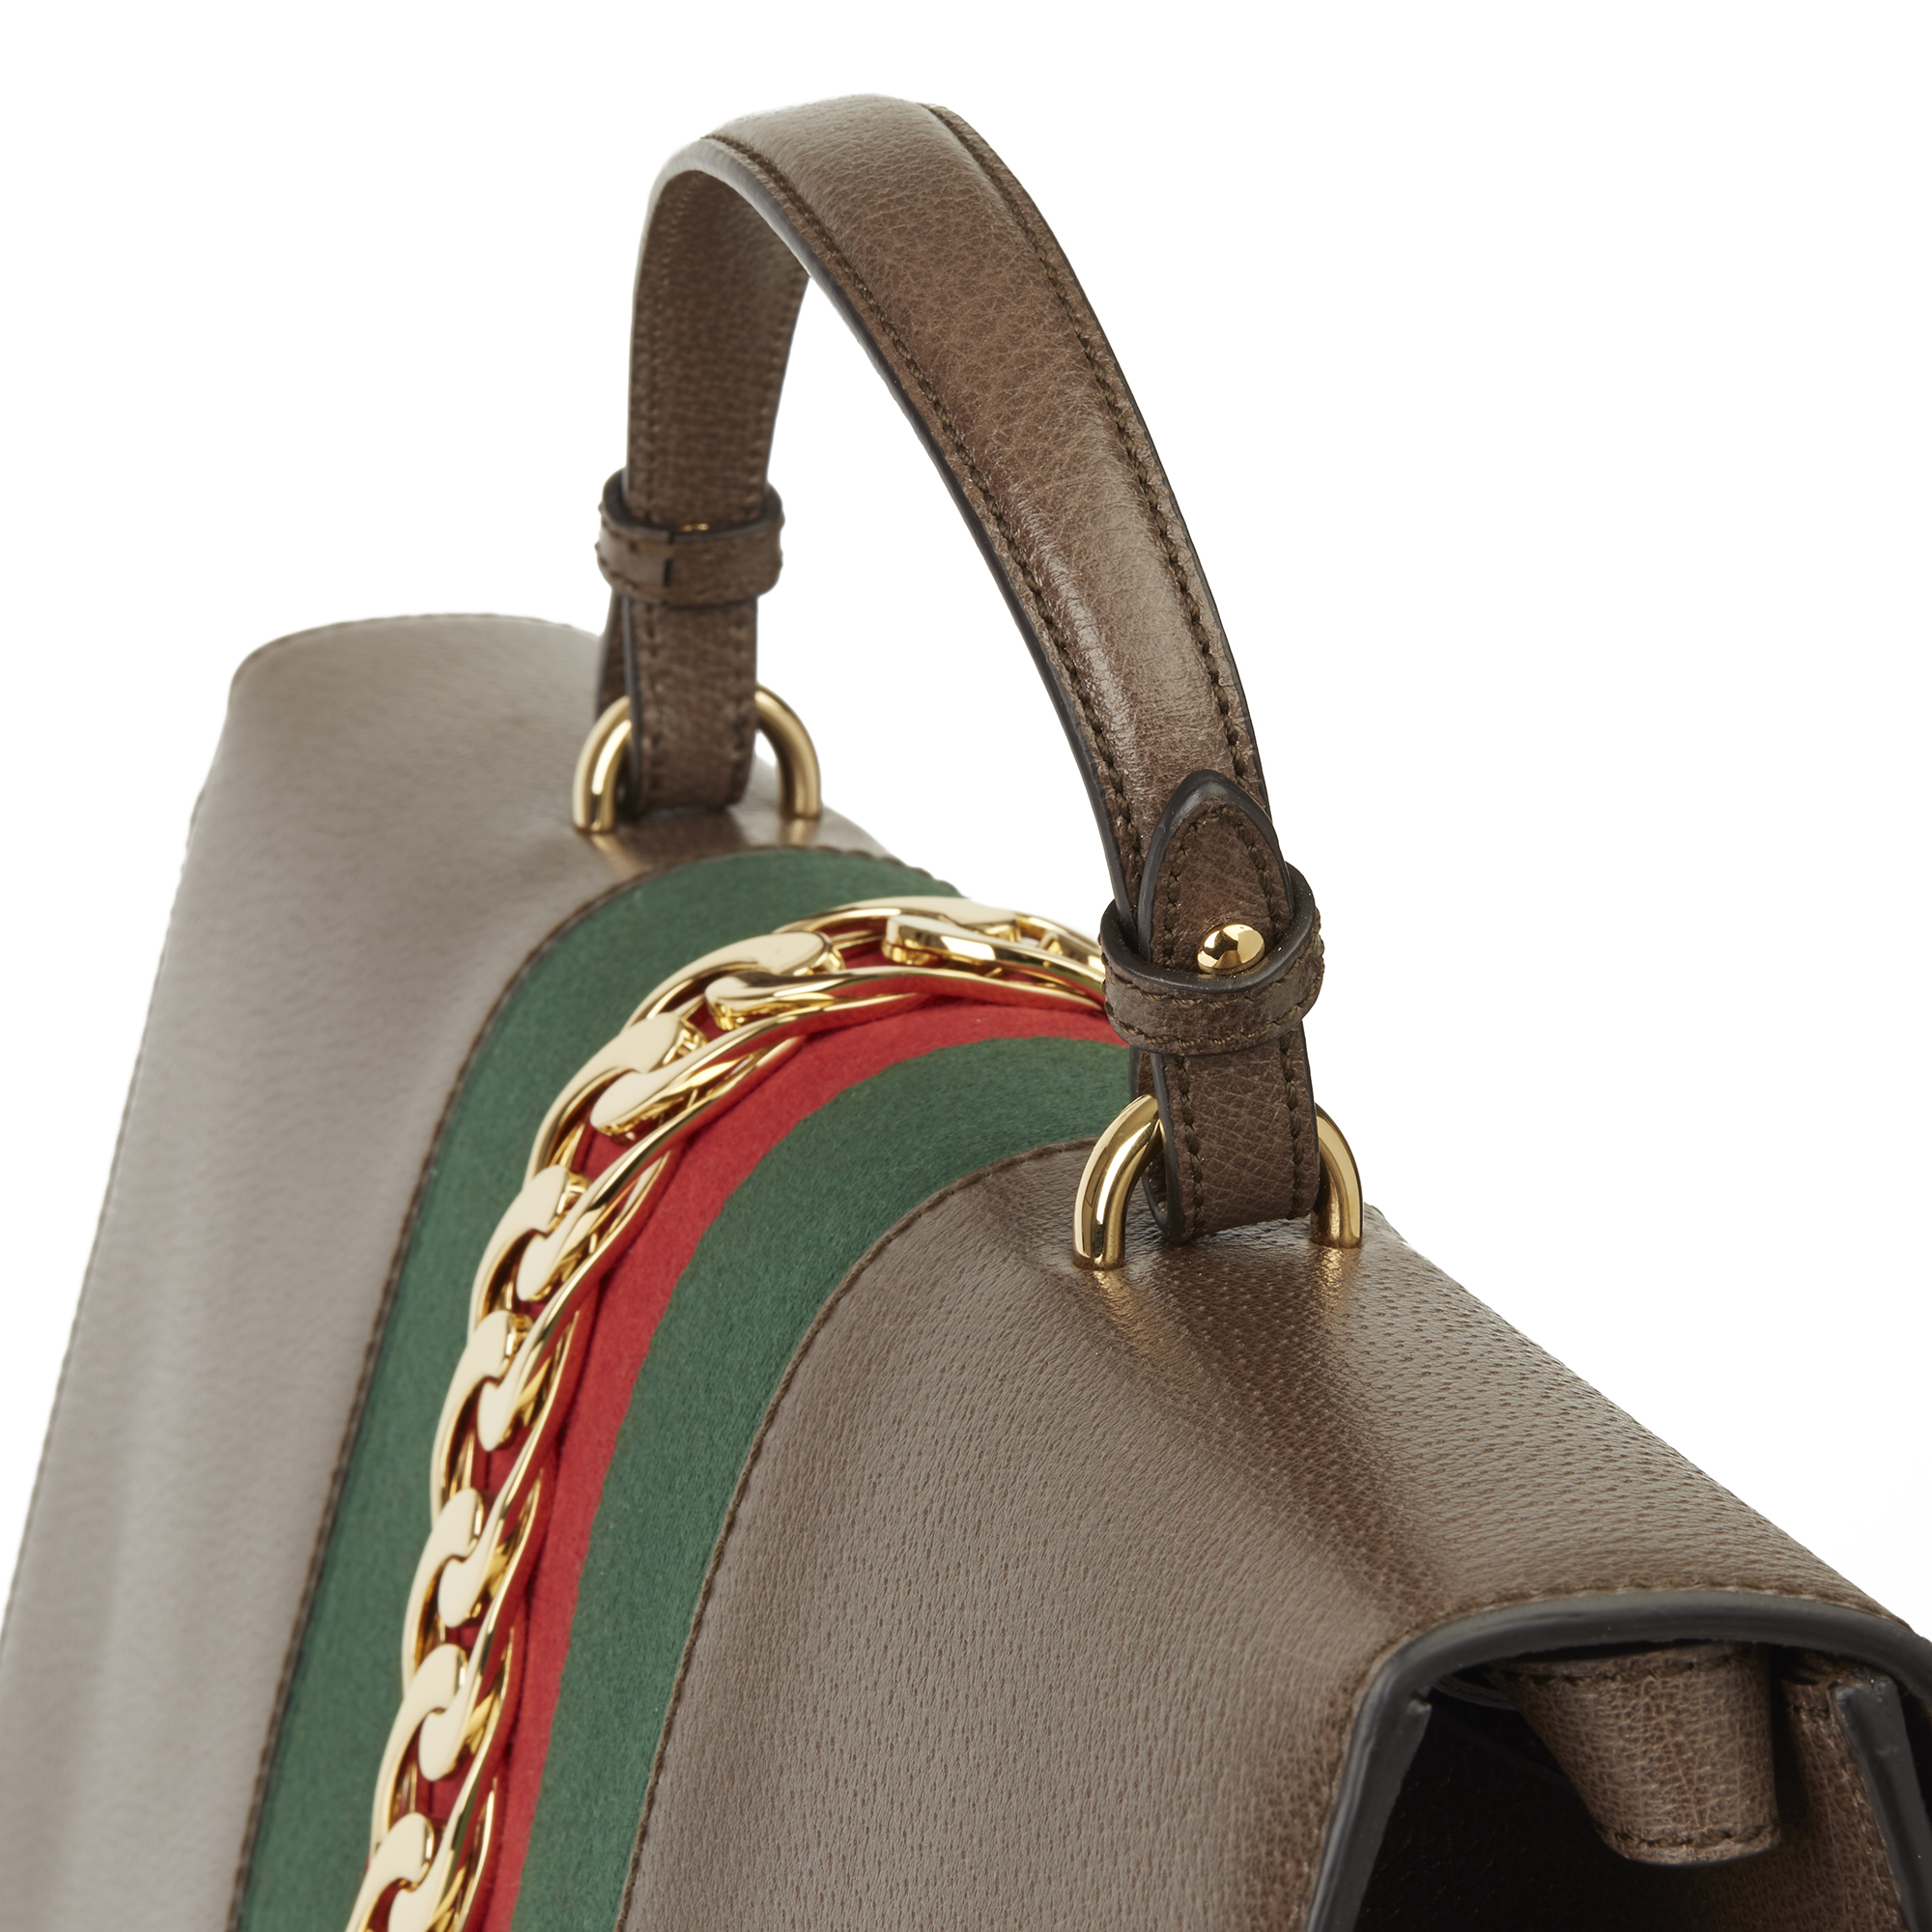 Gucci Brown Pigskin Leather Sylvie Top Handle Duffle Bag - Image 7 of 12